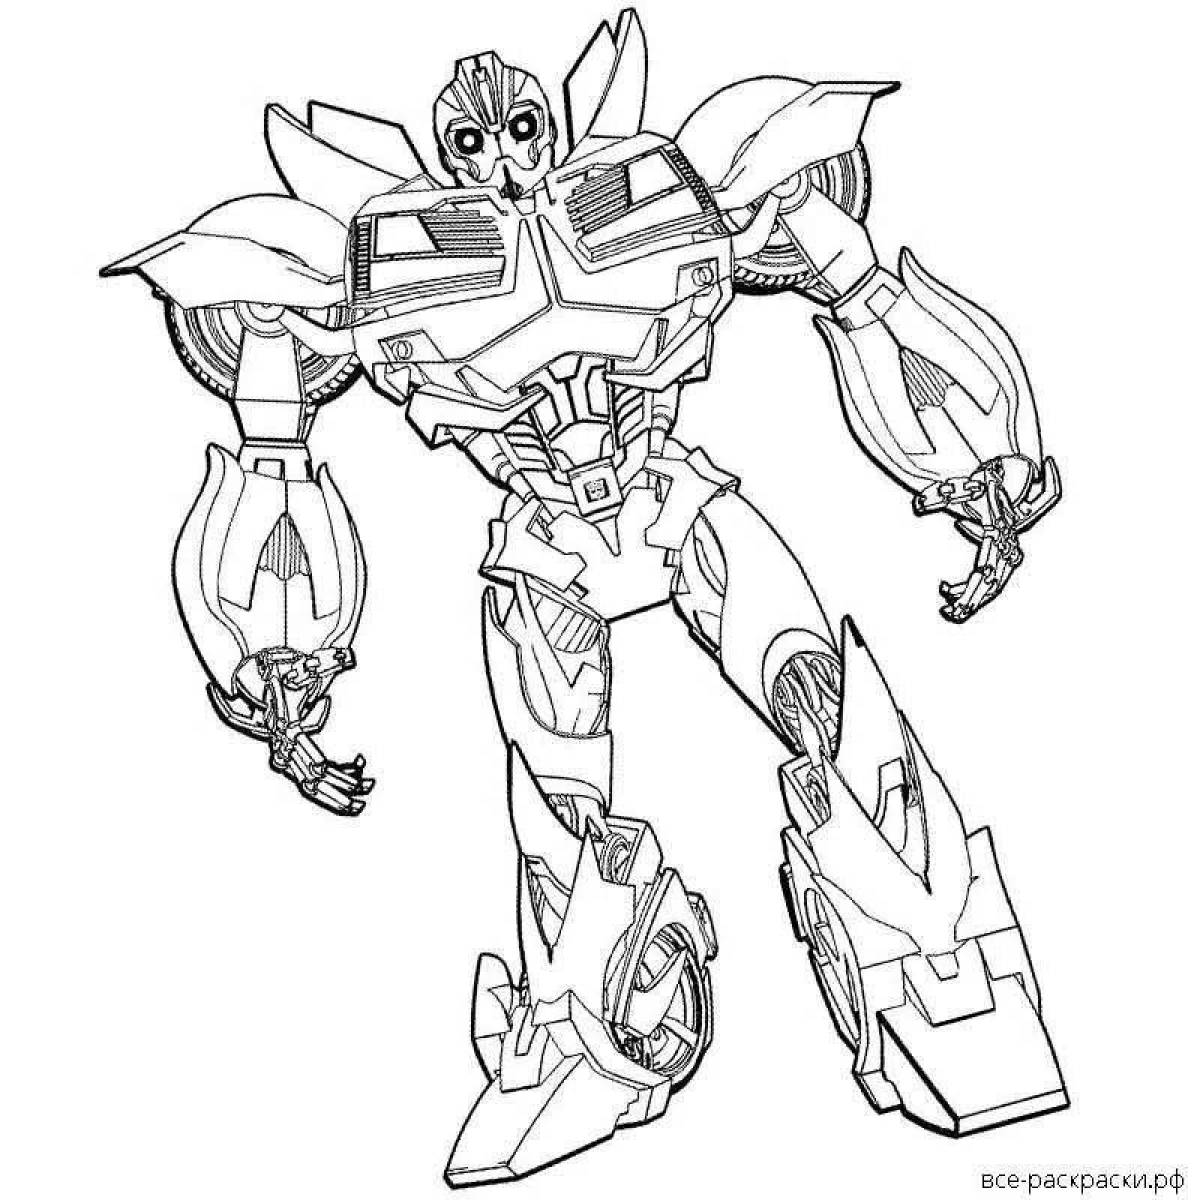 Lovely bumblebee machine coloring page